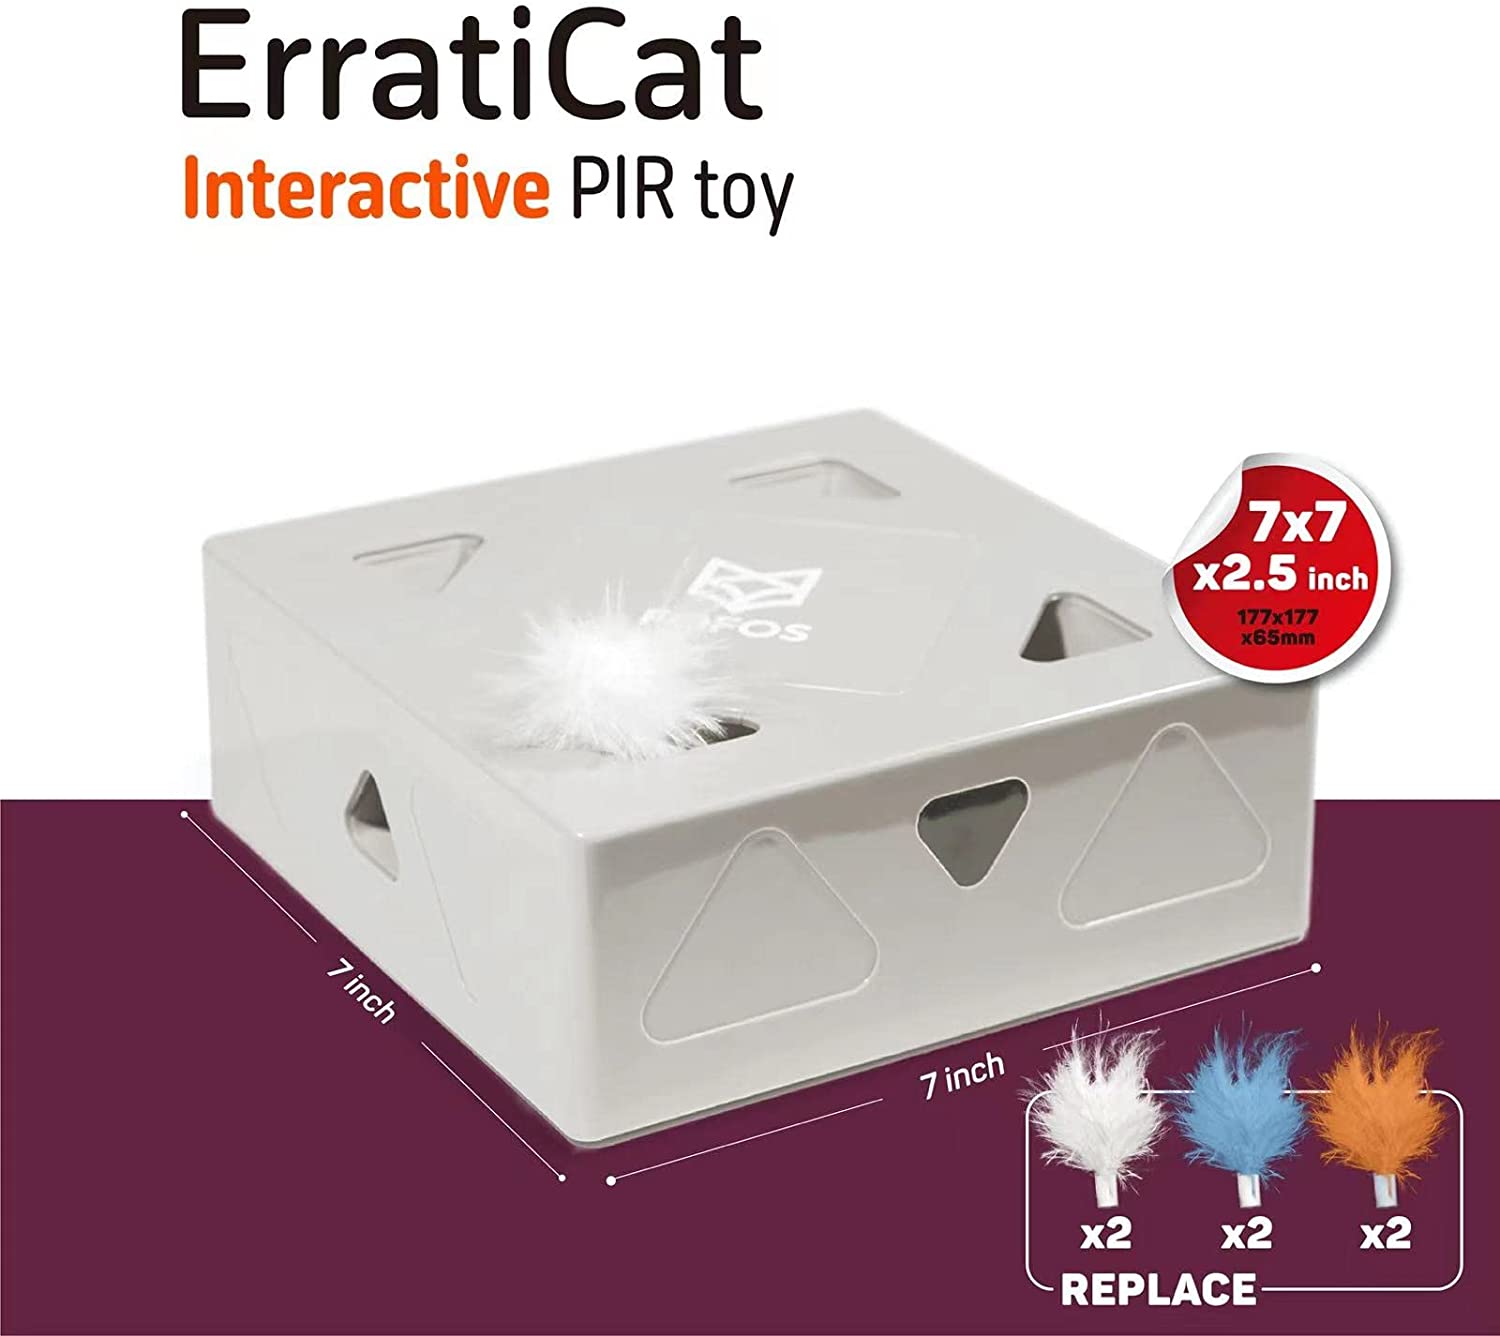 [FOFOS]-ErratiCat Interactive PIR Toy-White USB Rechargeable